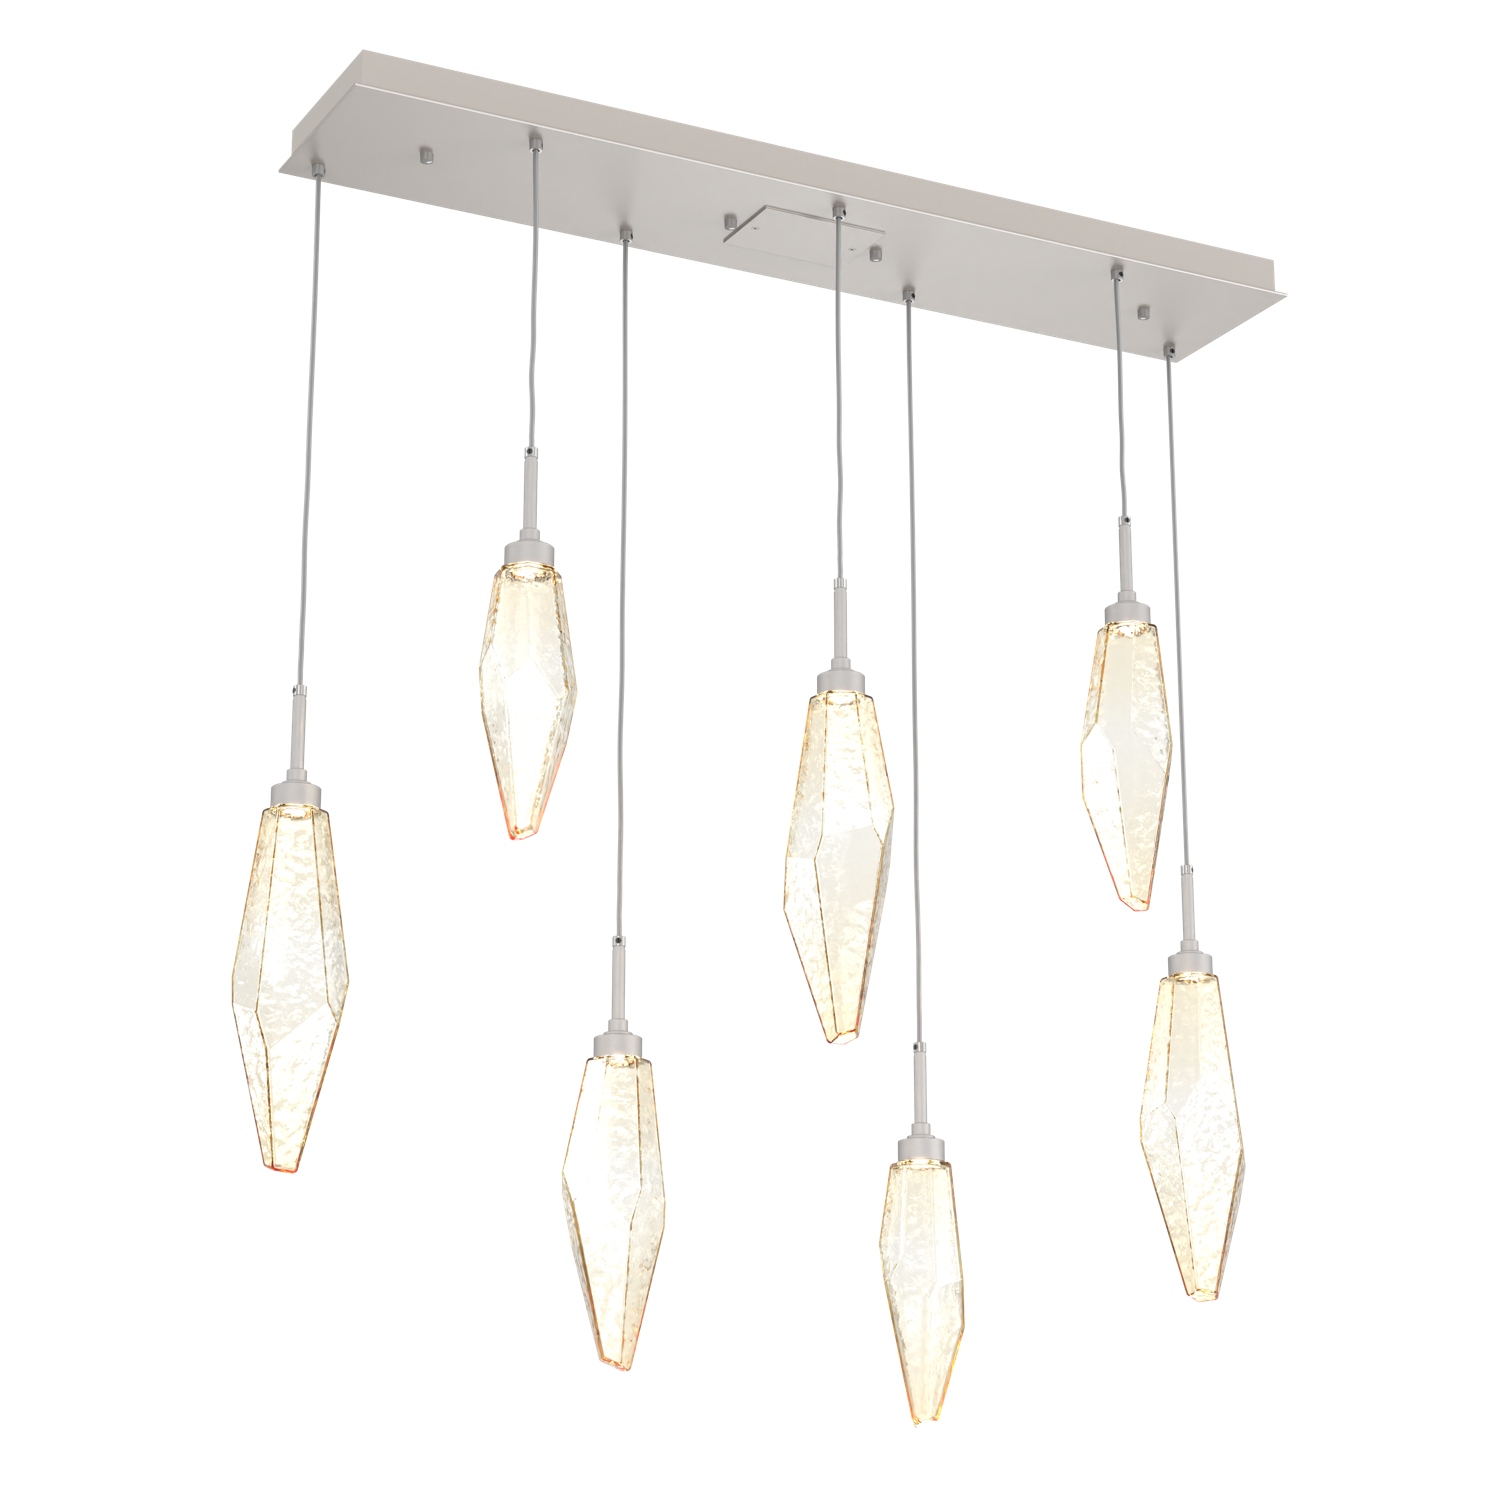 PLB0050-07-BS-CA-Hammerton-Studio-Rock-Crystal-7-light-linear-pendant-chandelier-with-beige-silver-finish-and-chilled-amber-blown-glass-shades-and-LED-lamping